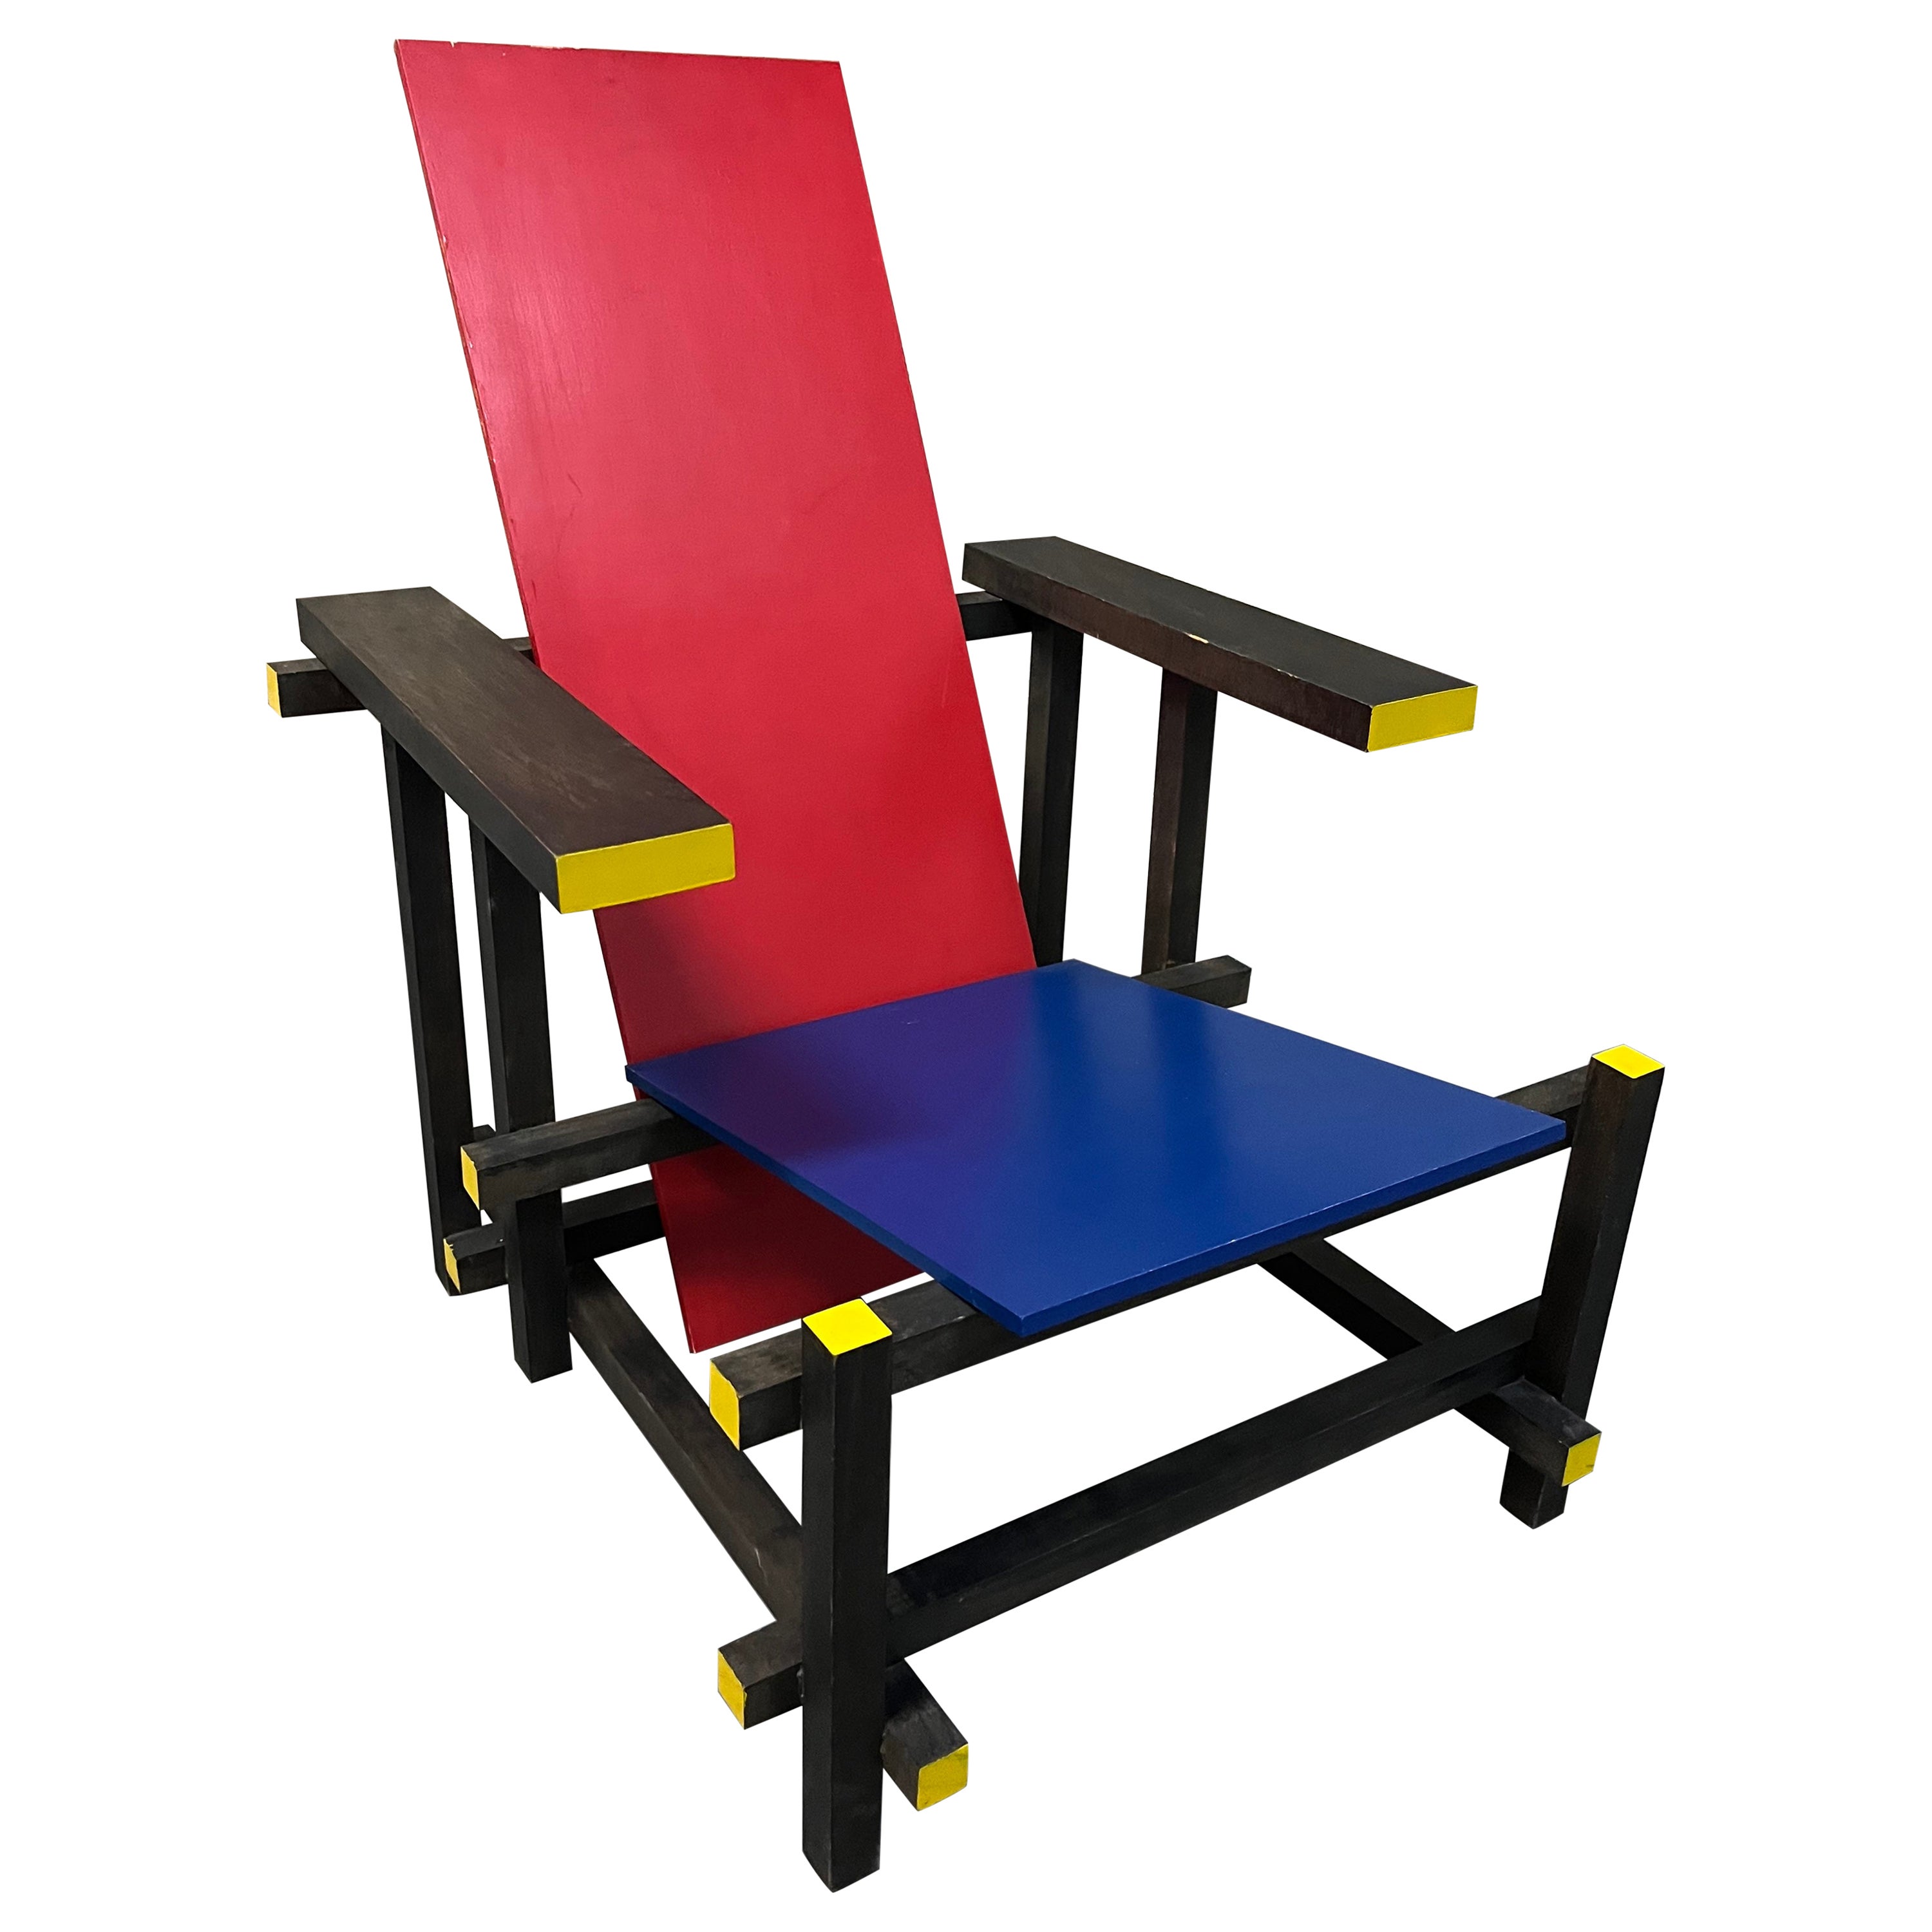 Vintage Reproduction of Gerrit Rietveld's Red and Blue Chair. Circa 1960s